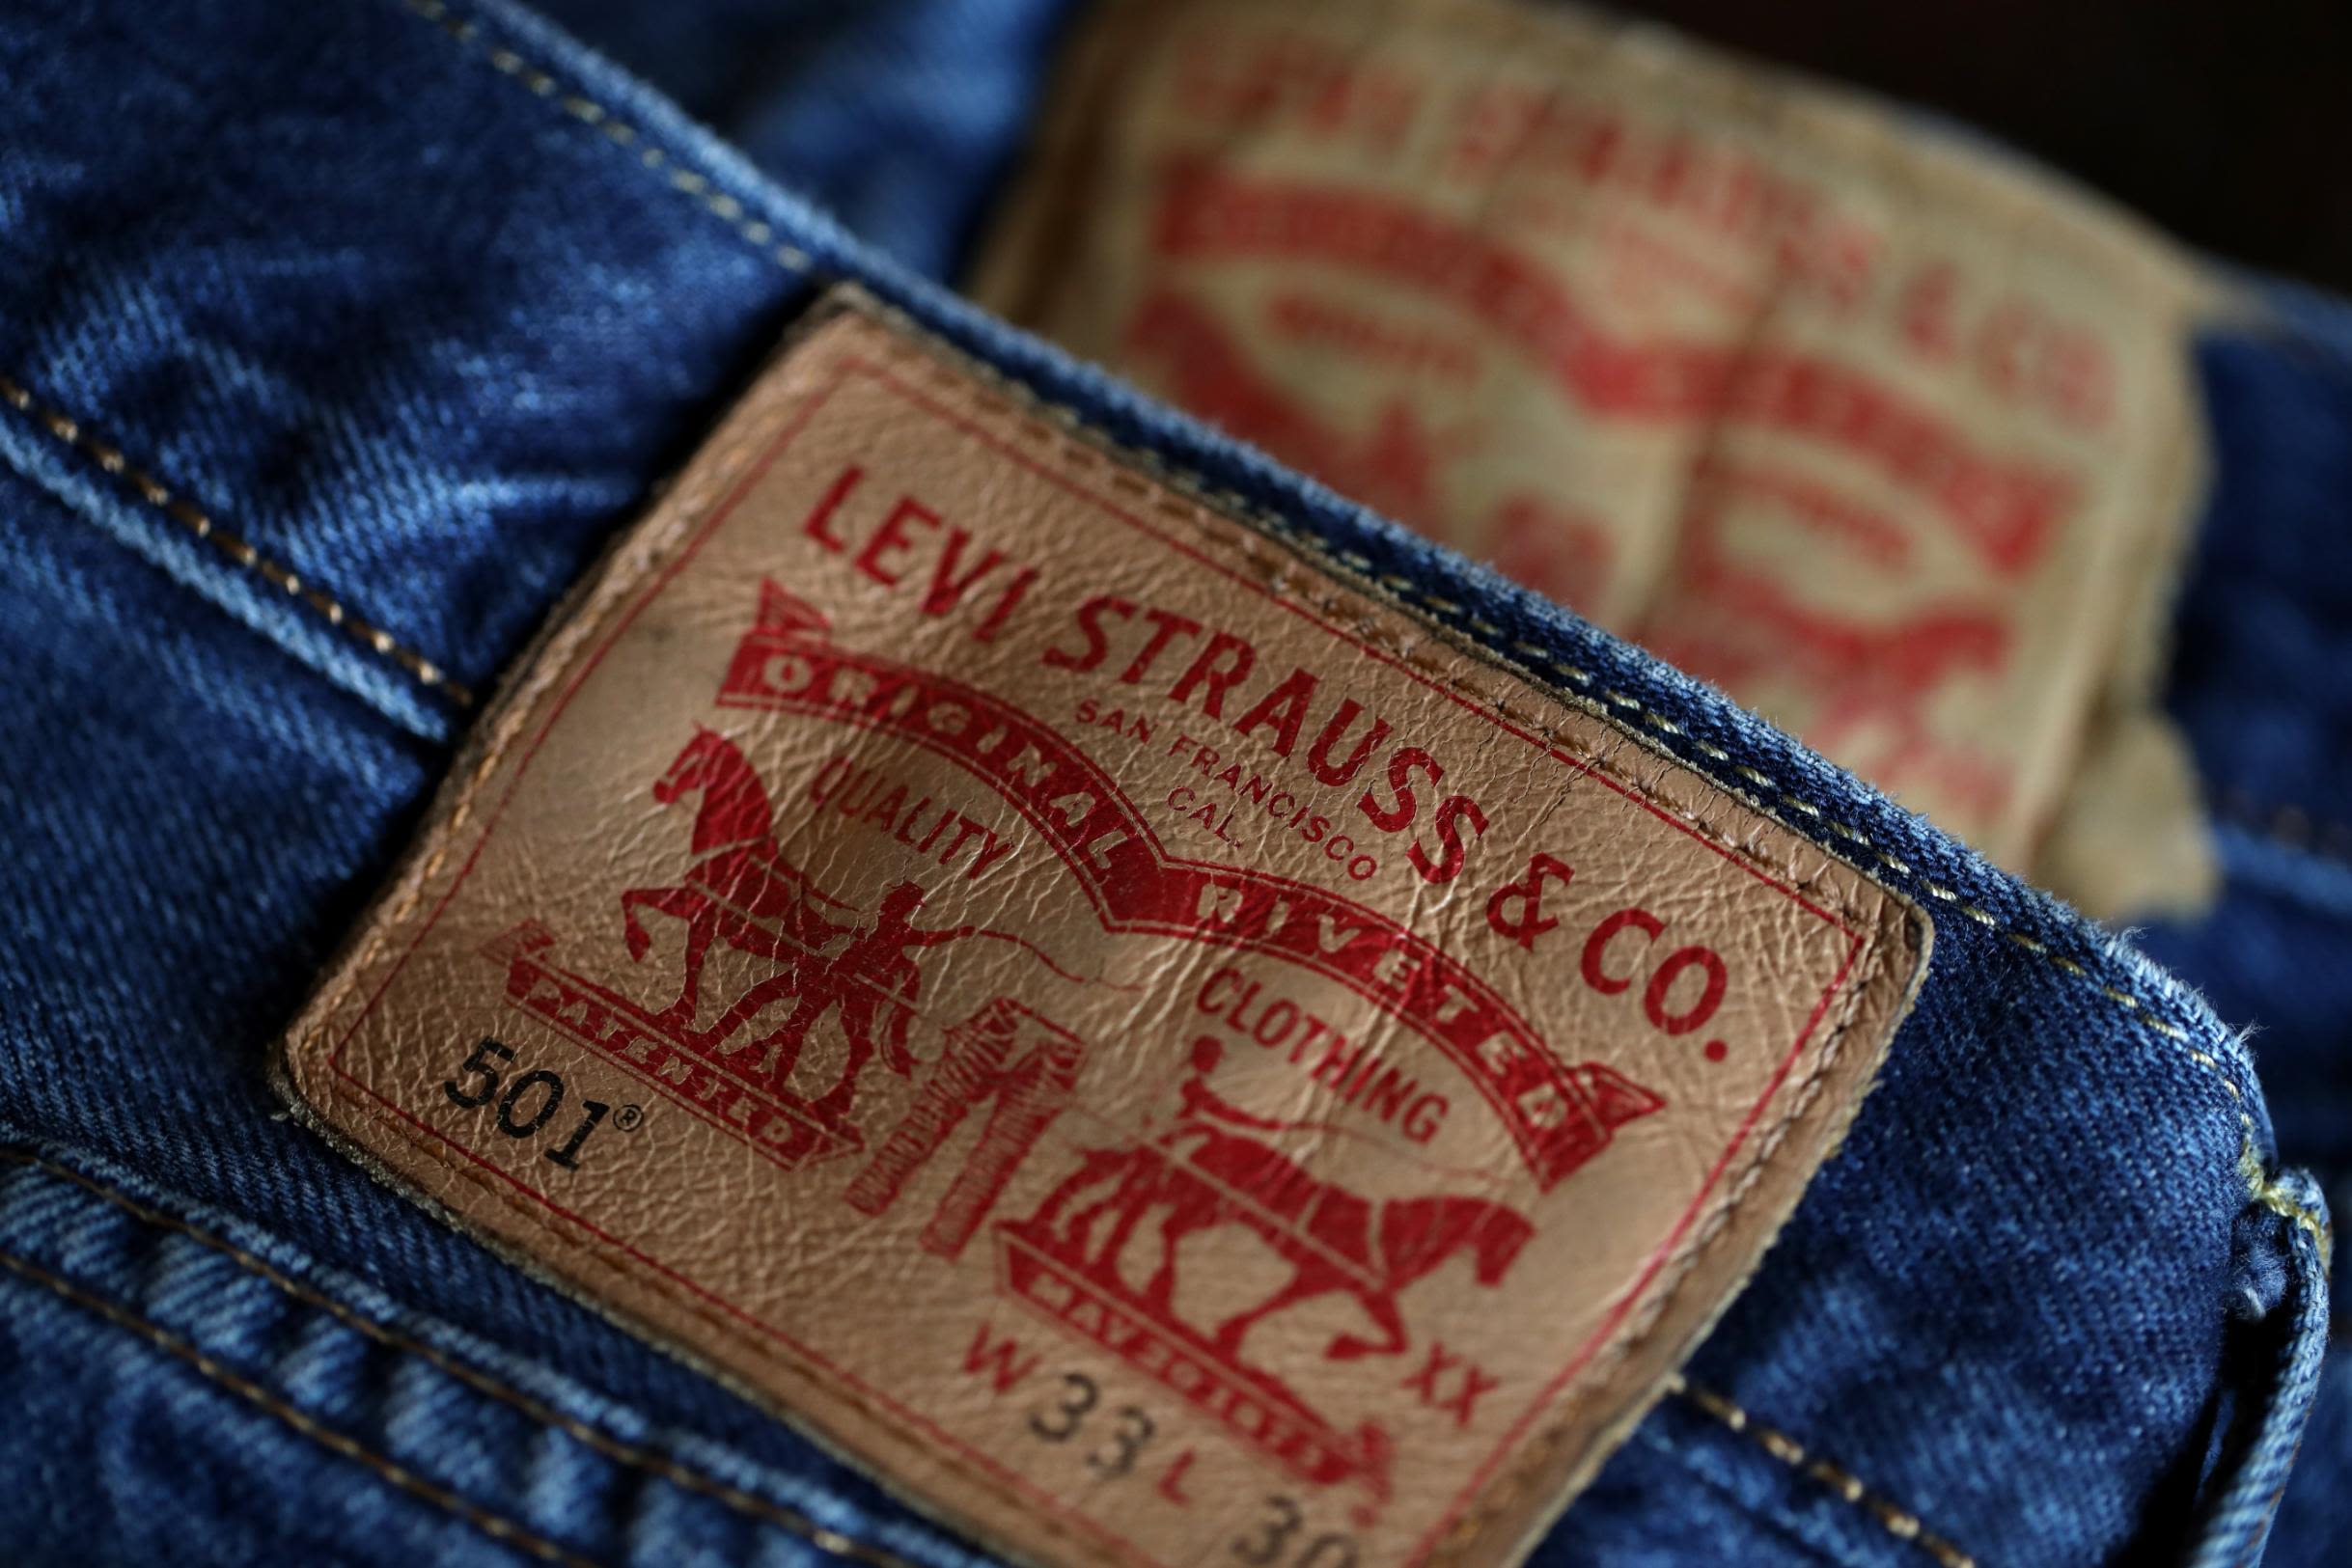 Levi's CEO: Don't put jeans in the freezer | CNN Business